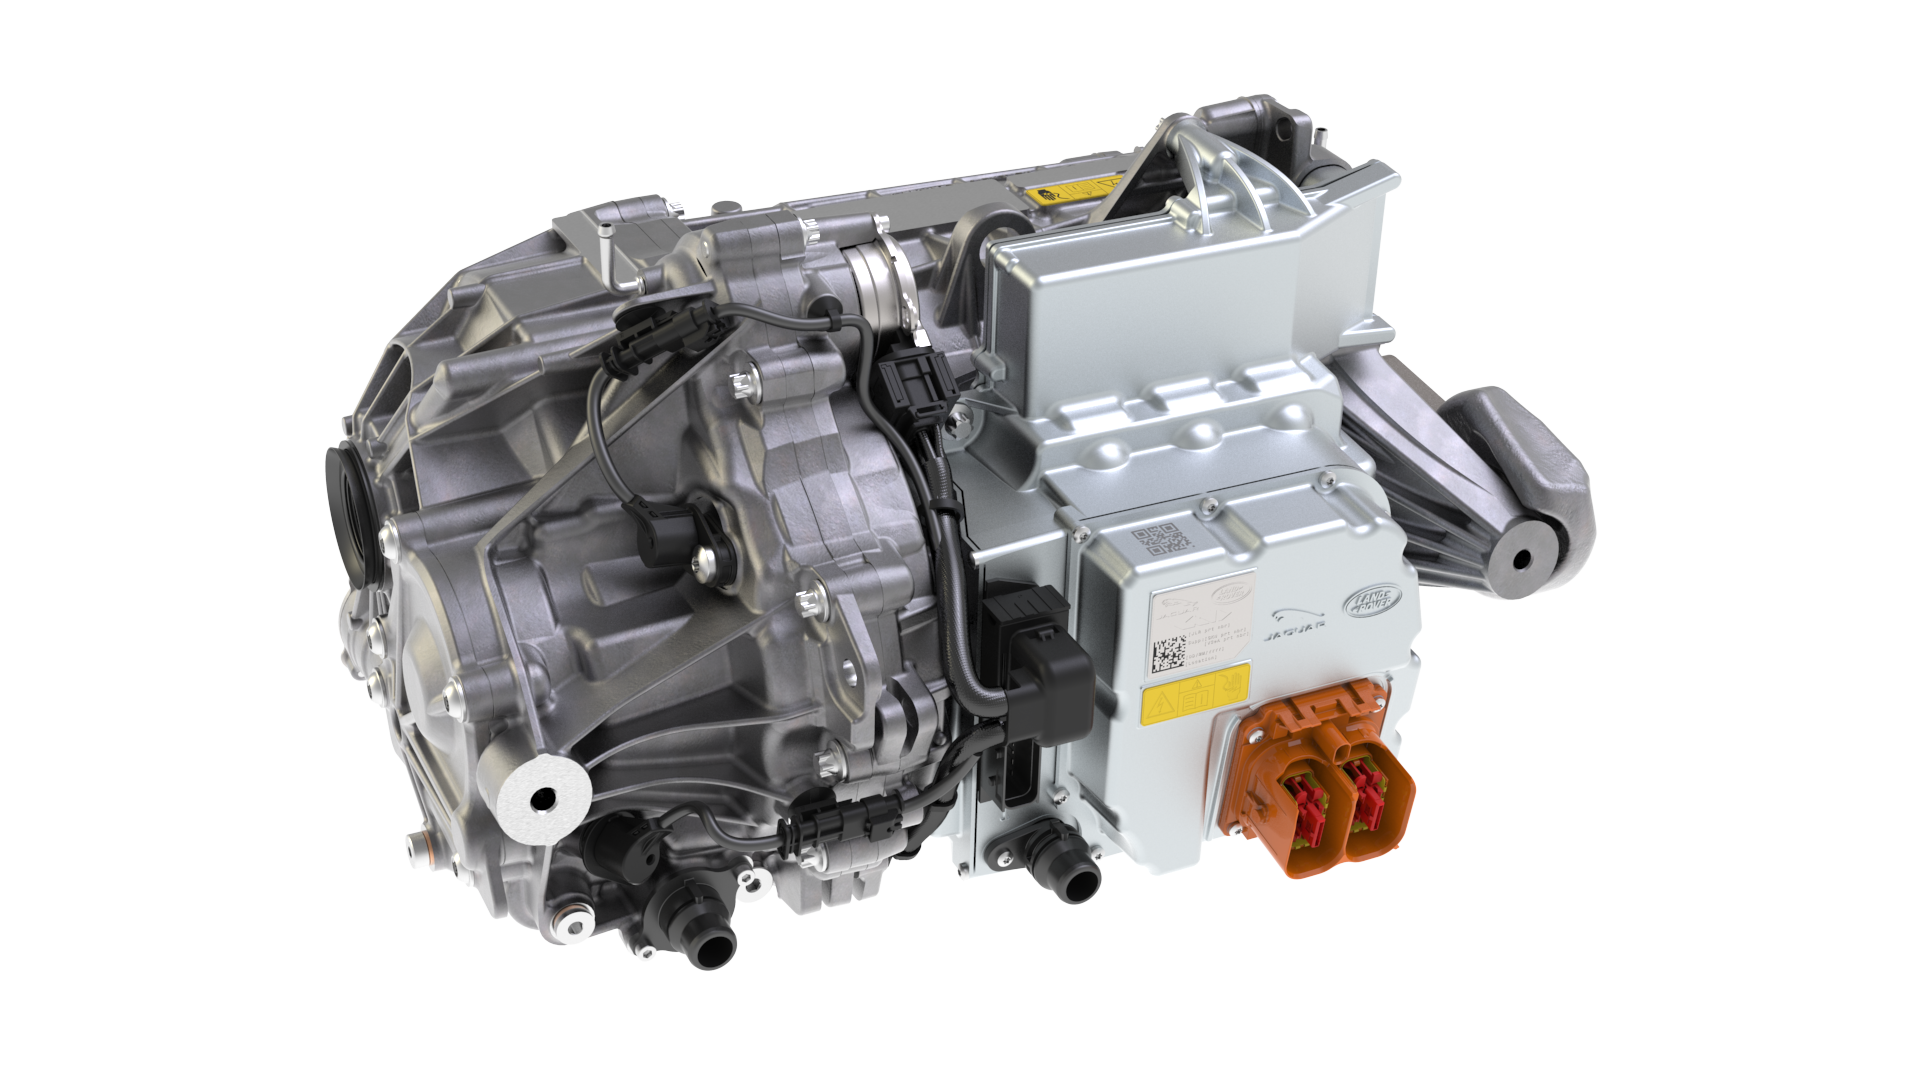 GKN was recognized for its 3-in-1 eDrive system.